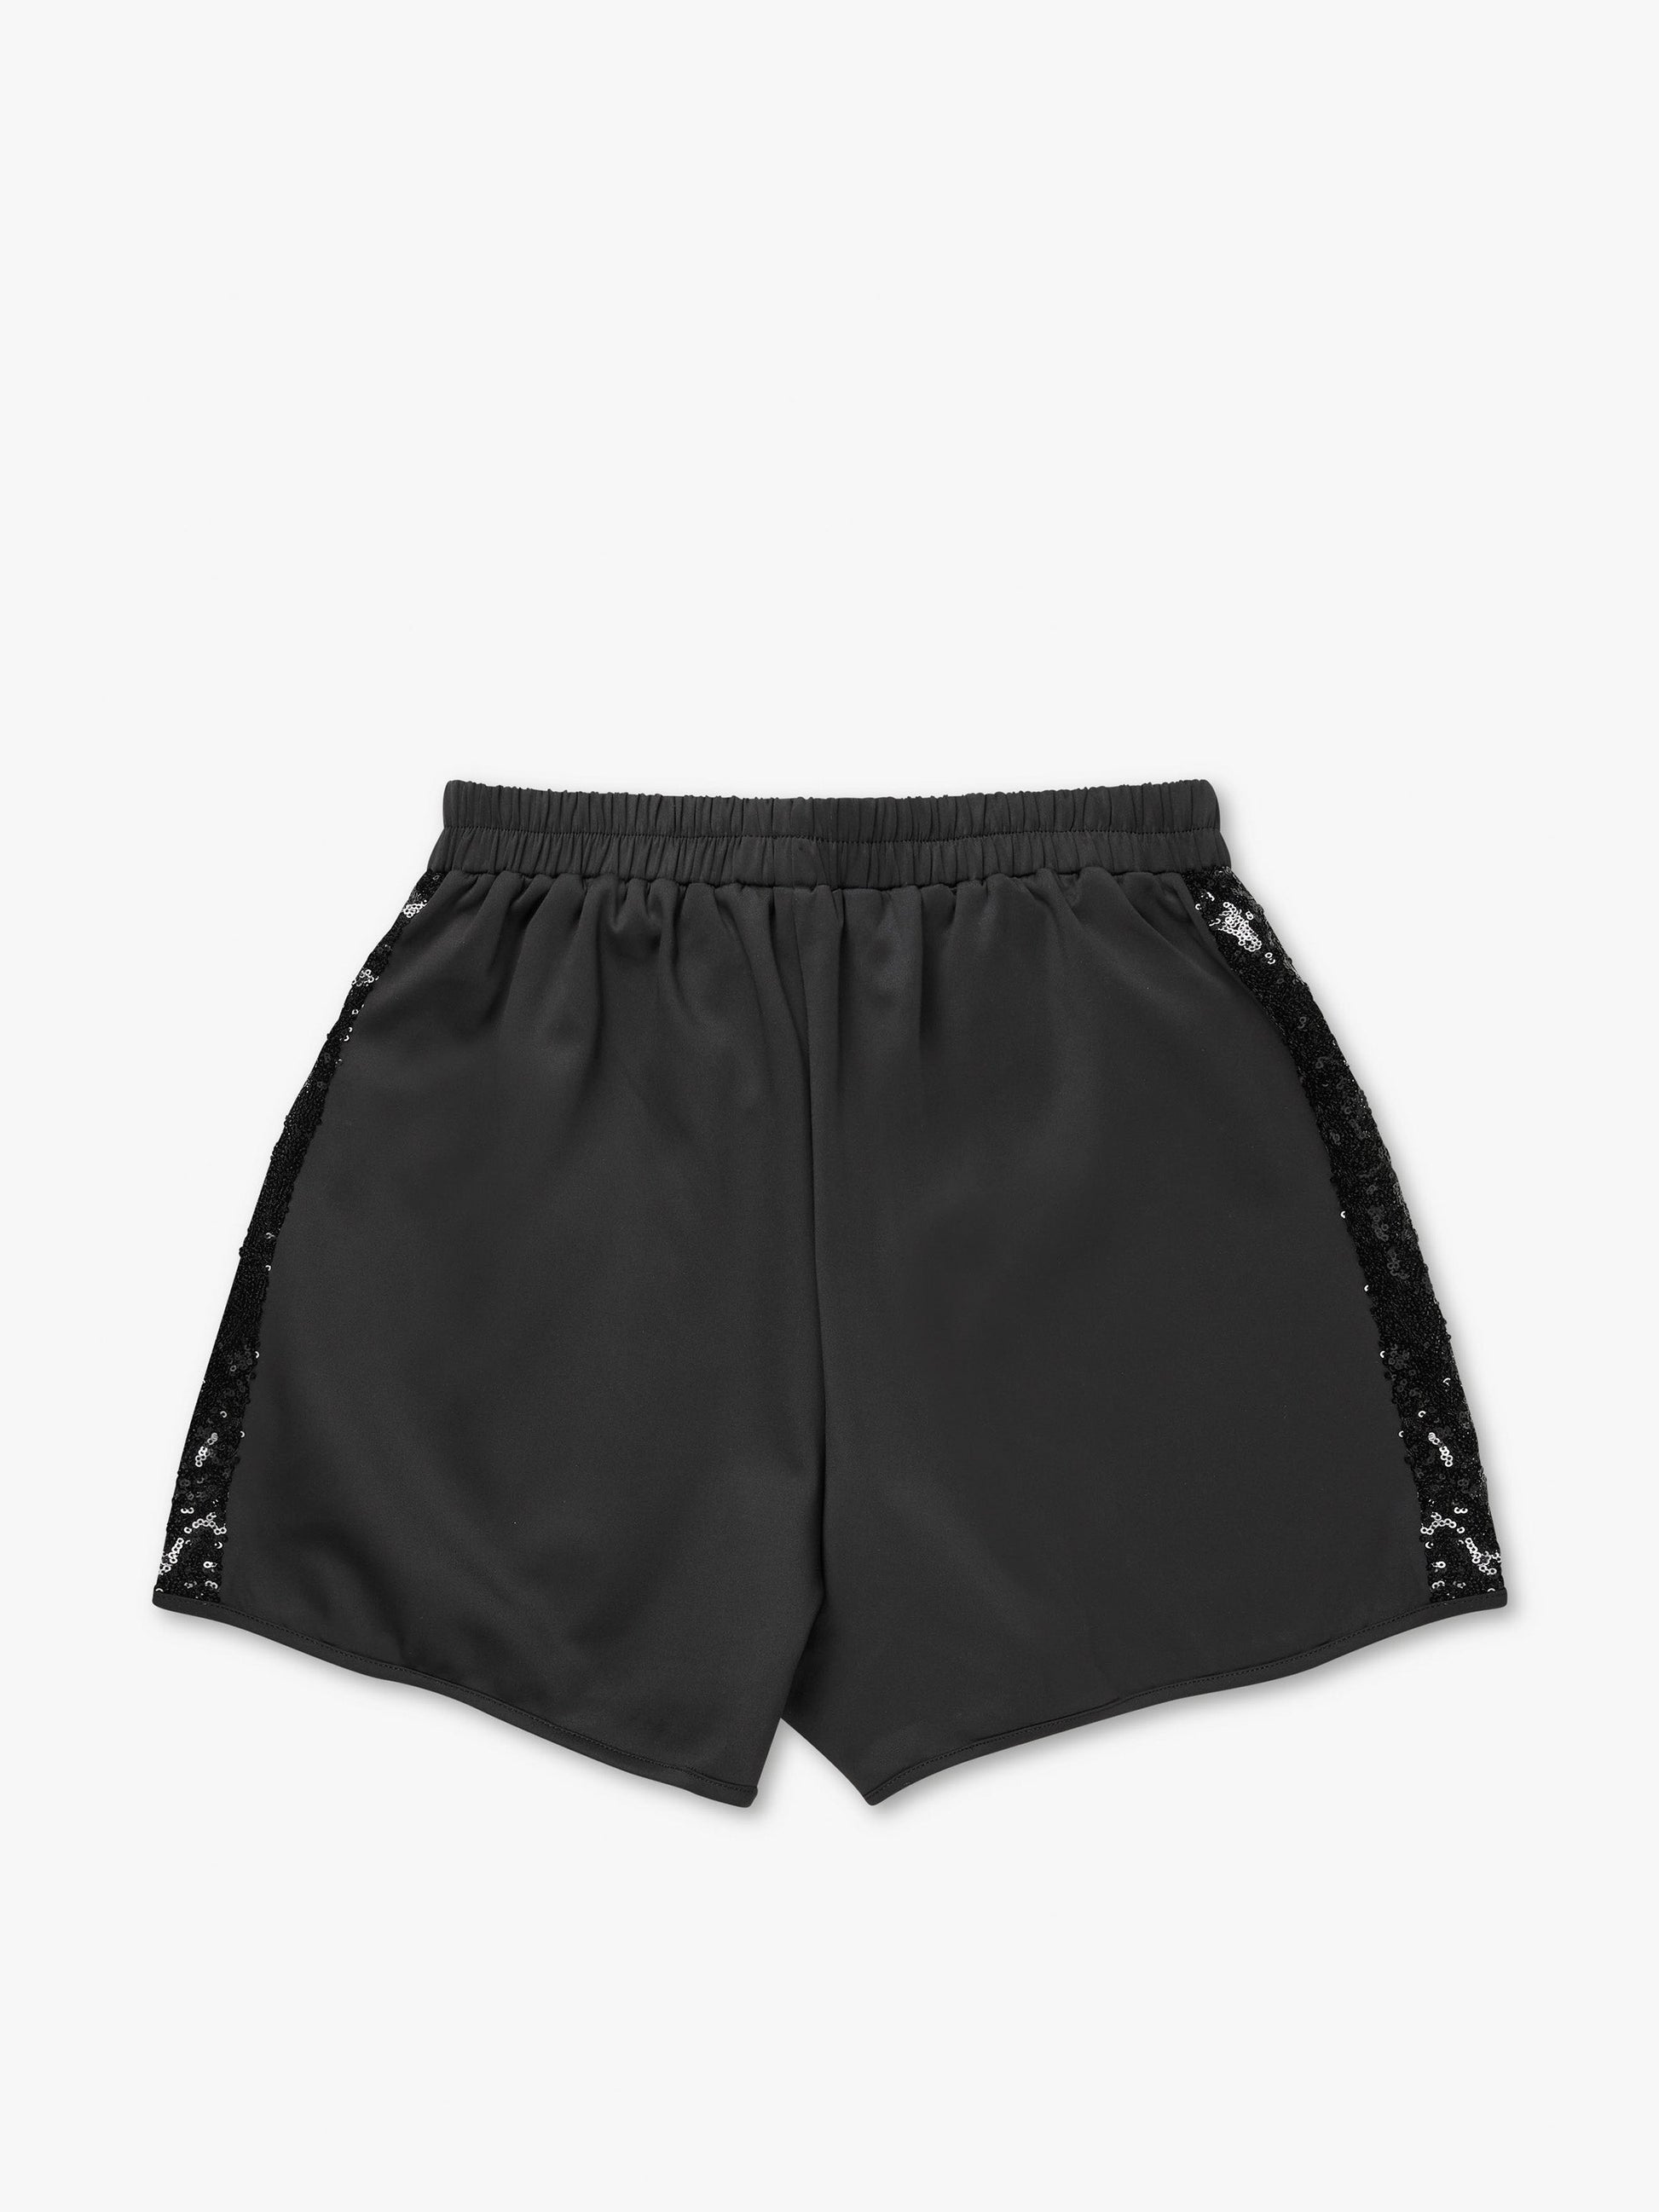 7 DAYS Sequinned Tech Shorts Shorts 001 Black